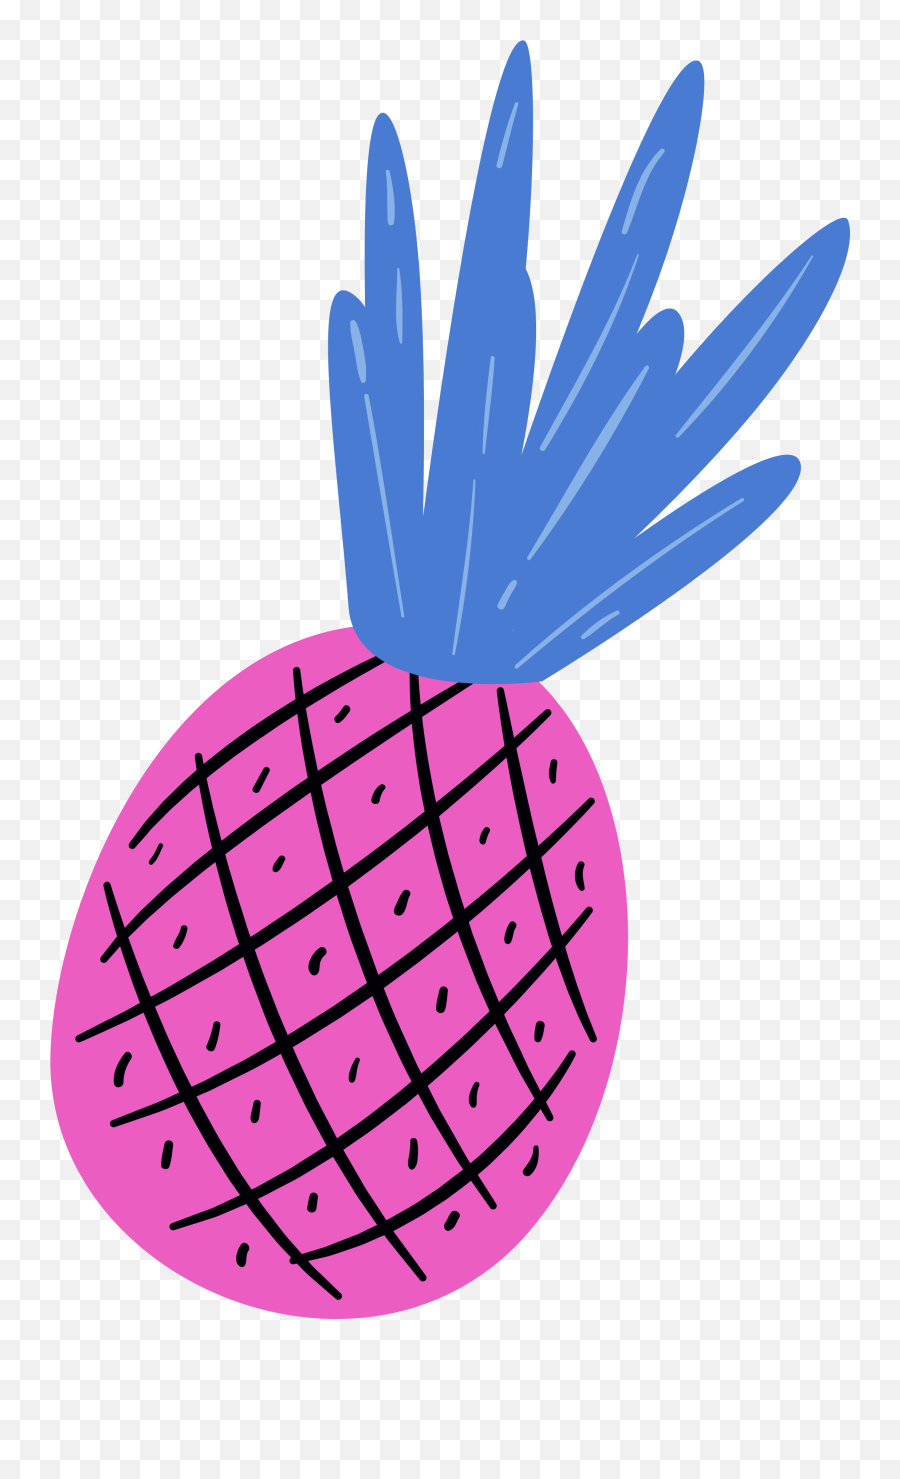 Leave - Free Colorful Pineapple Clipart Png Transparent Png Fun Clipart,Pineapple Clipart Png